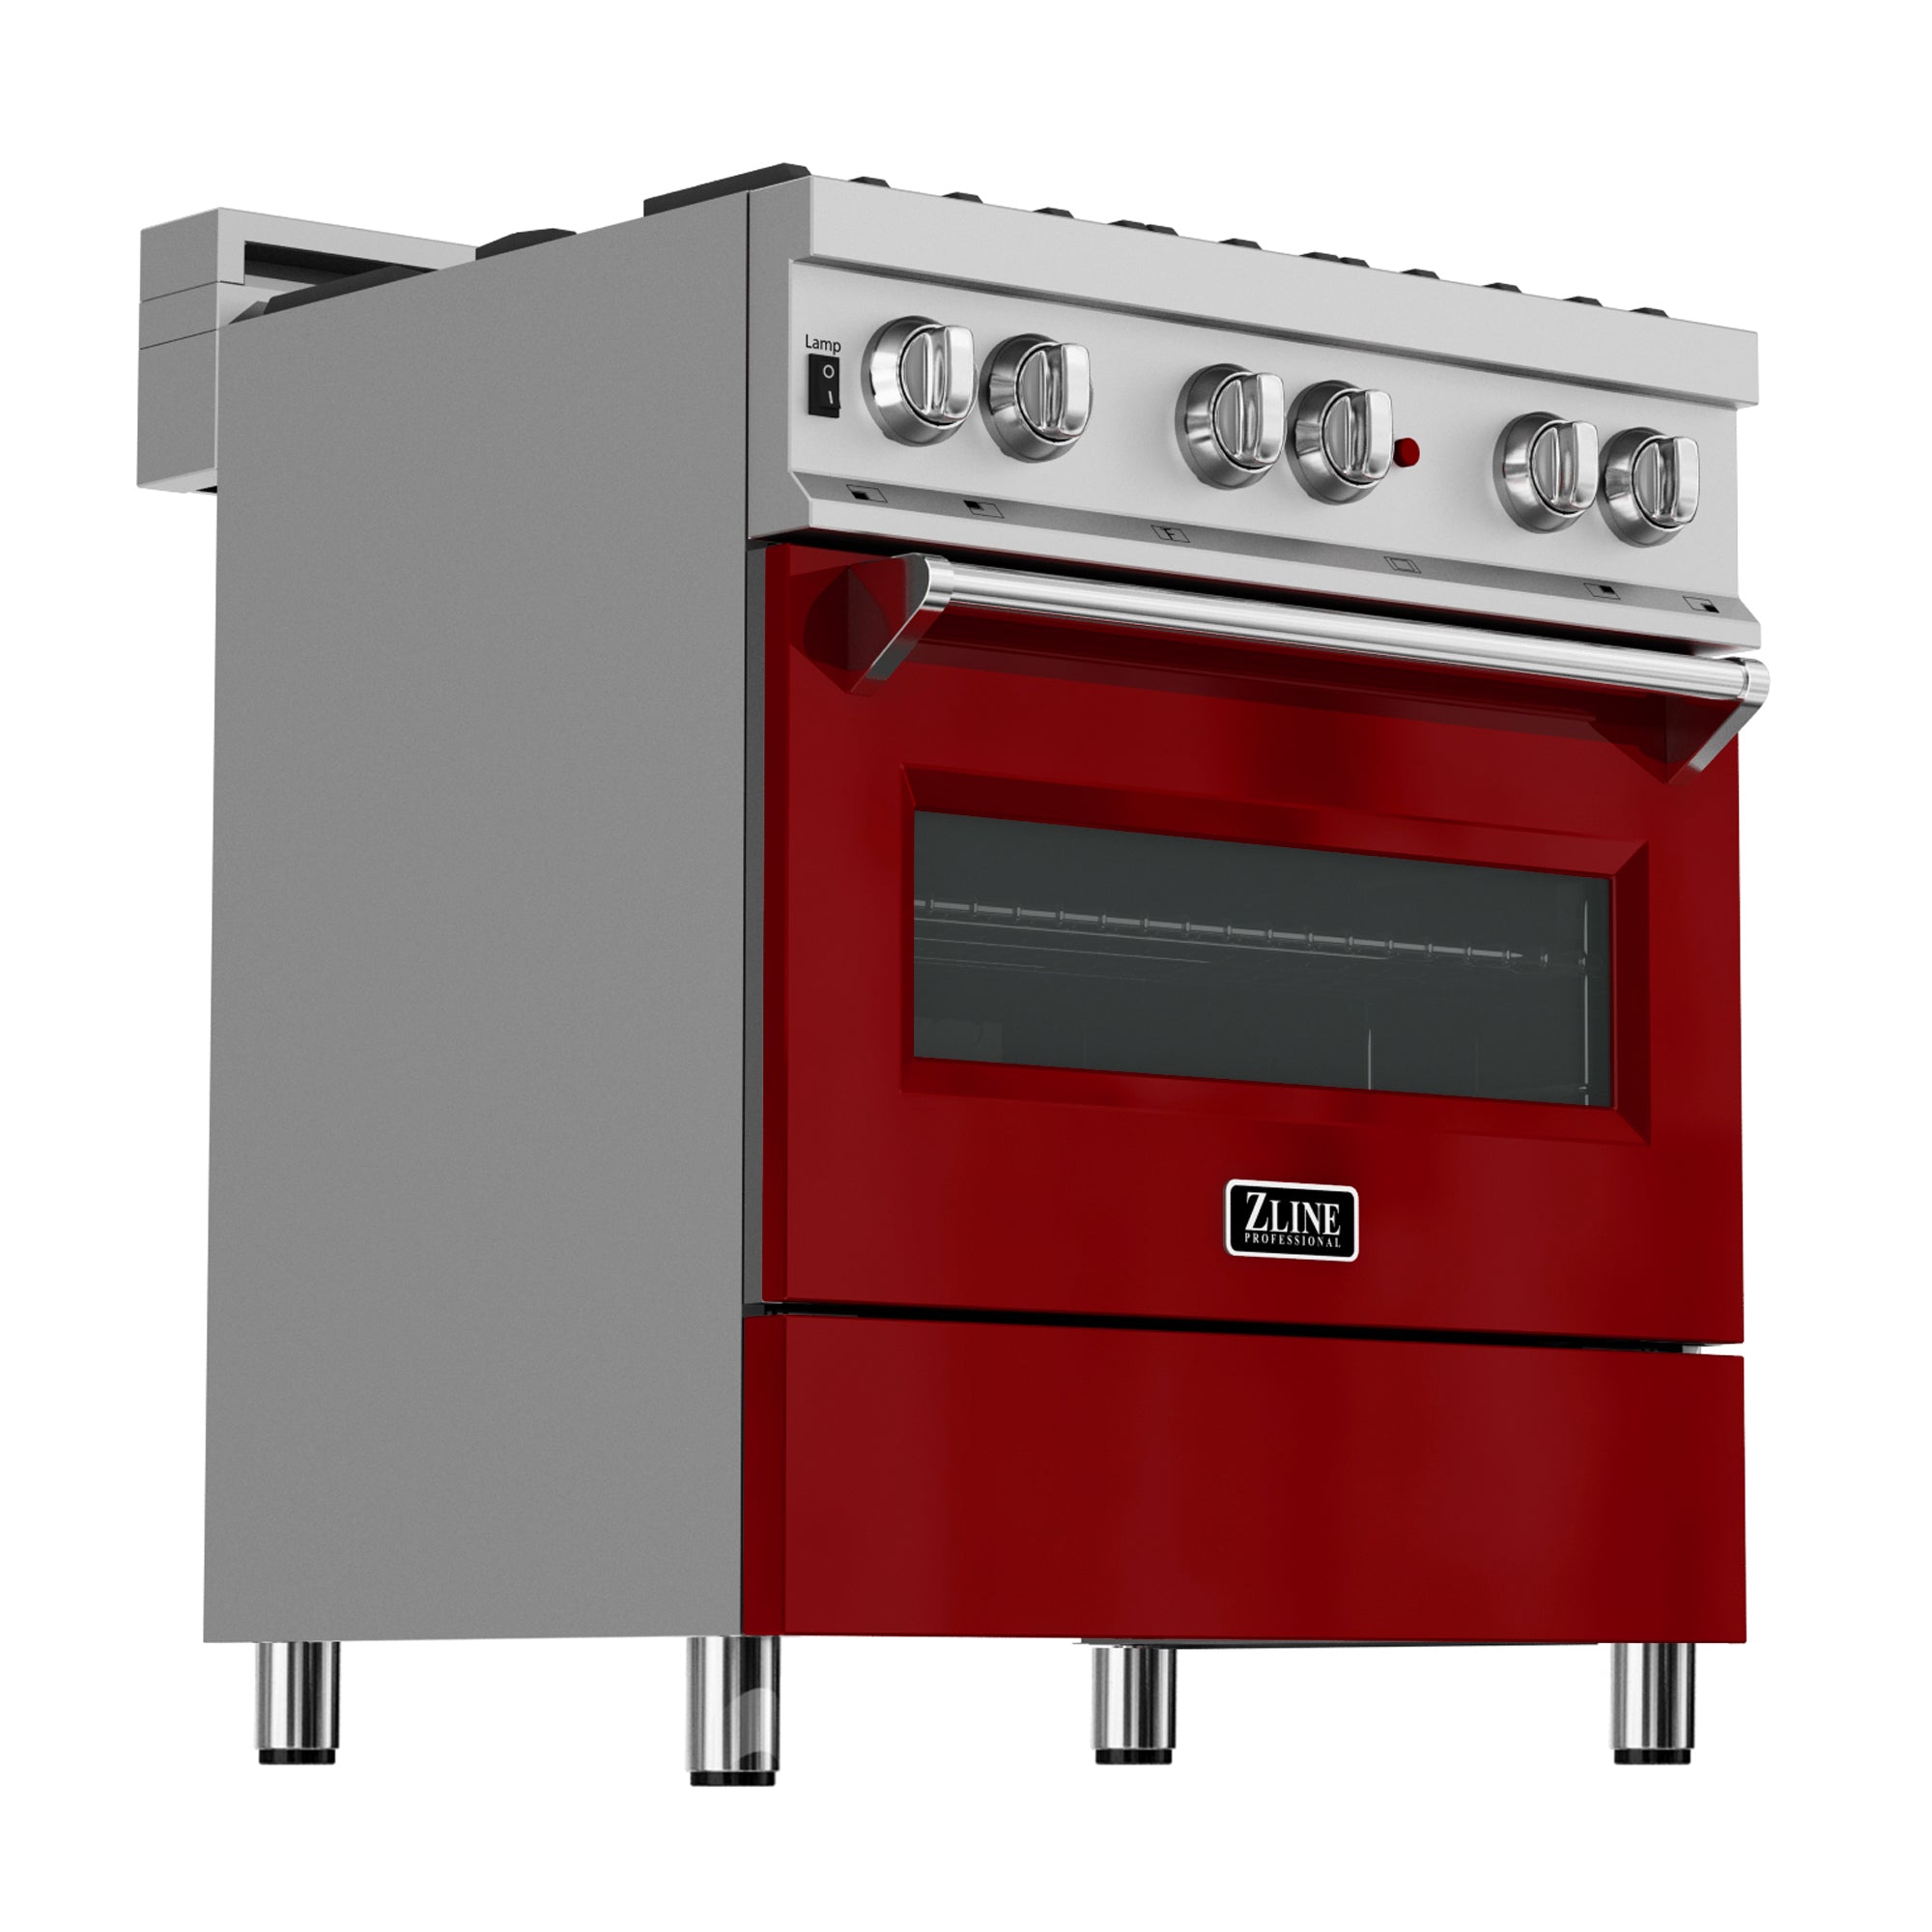 ZLINE 36" 4.6 cu. ft. Dual Fuel Range with Gas Stove and Electric Oven in Fingerprint Resistant Stainless Steel and Red Gloss Door (RAS-RG-36)